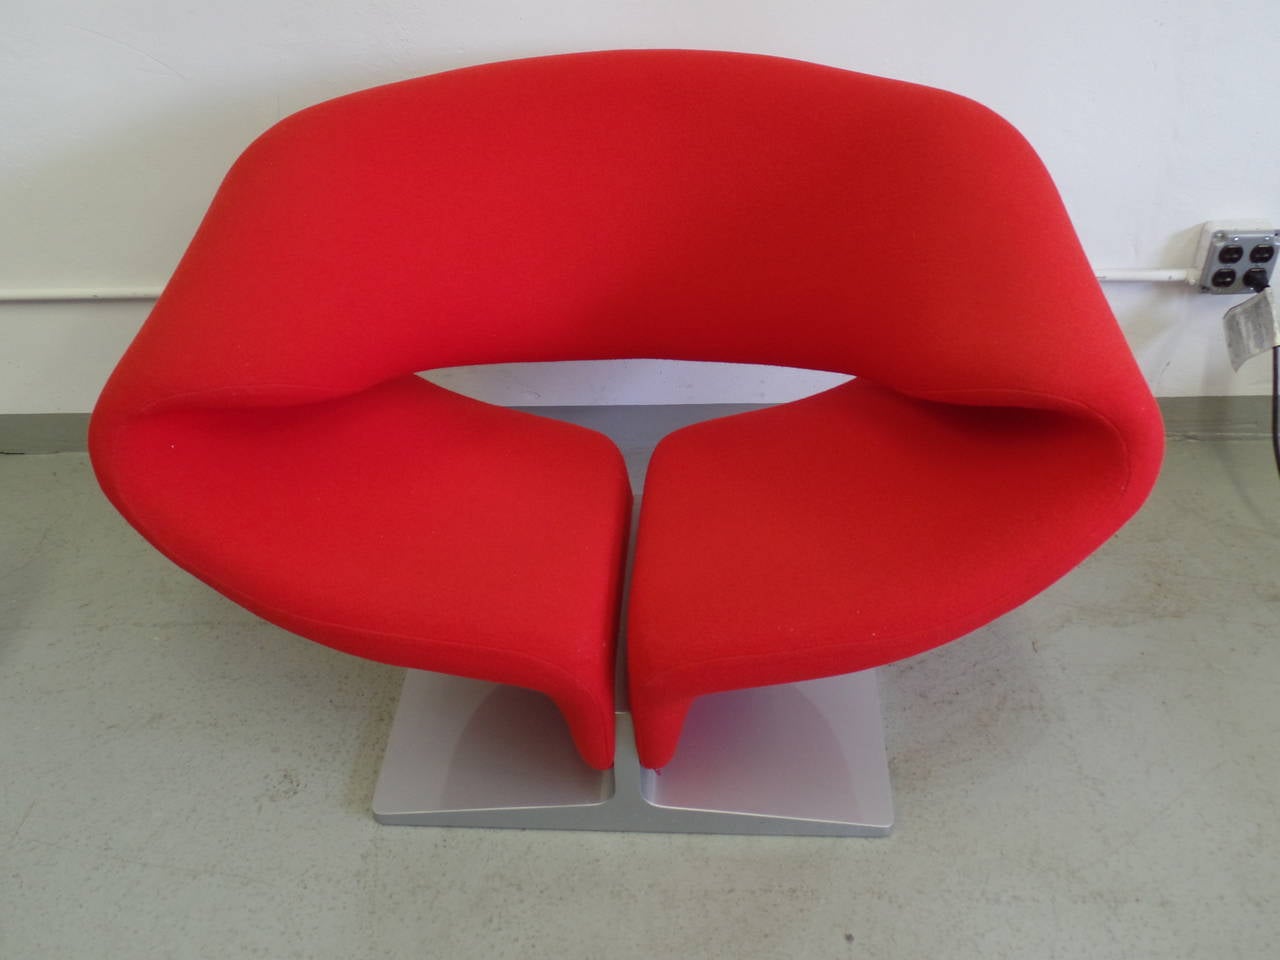 Elegant pair of French Mid-Century Modern lounge chairs or armchairs by Pierre Paulin for Artifort. The bright red wool upholstered chair seat is in a stunning organic form and is cantilevered over a silver lacquered wood base. The color combination